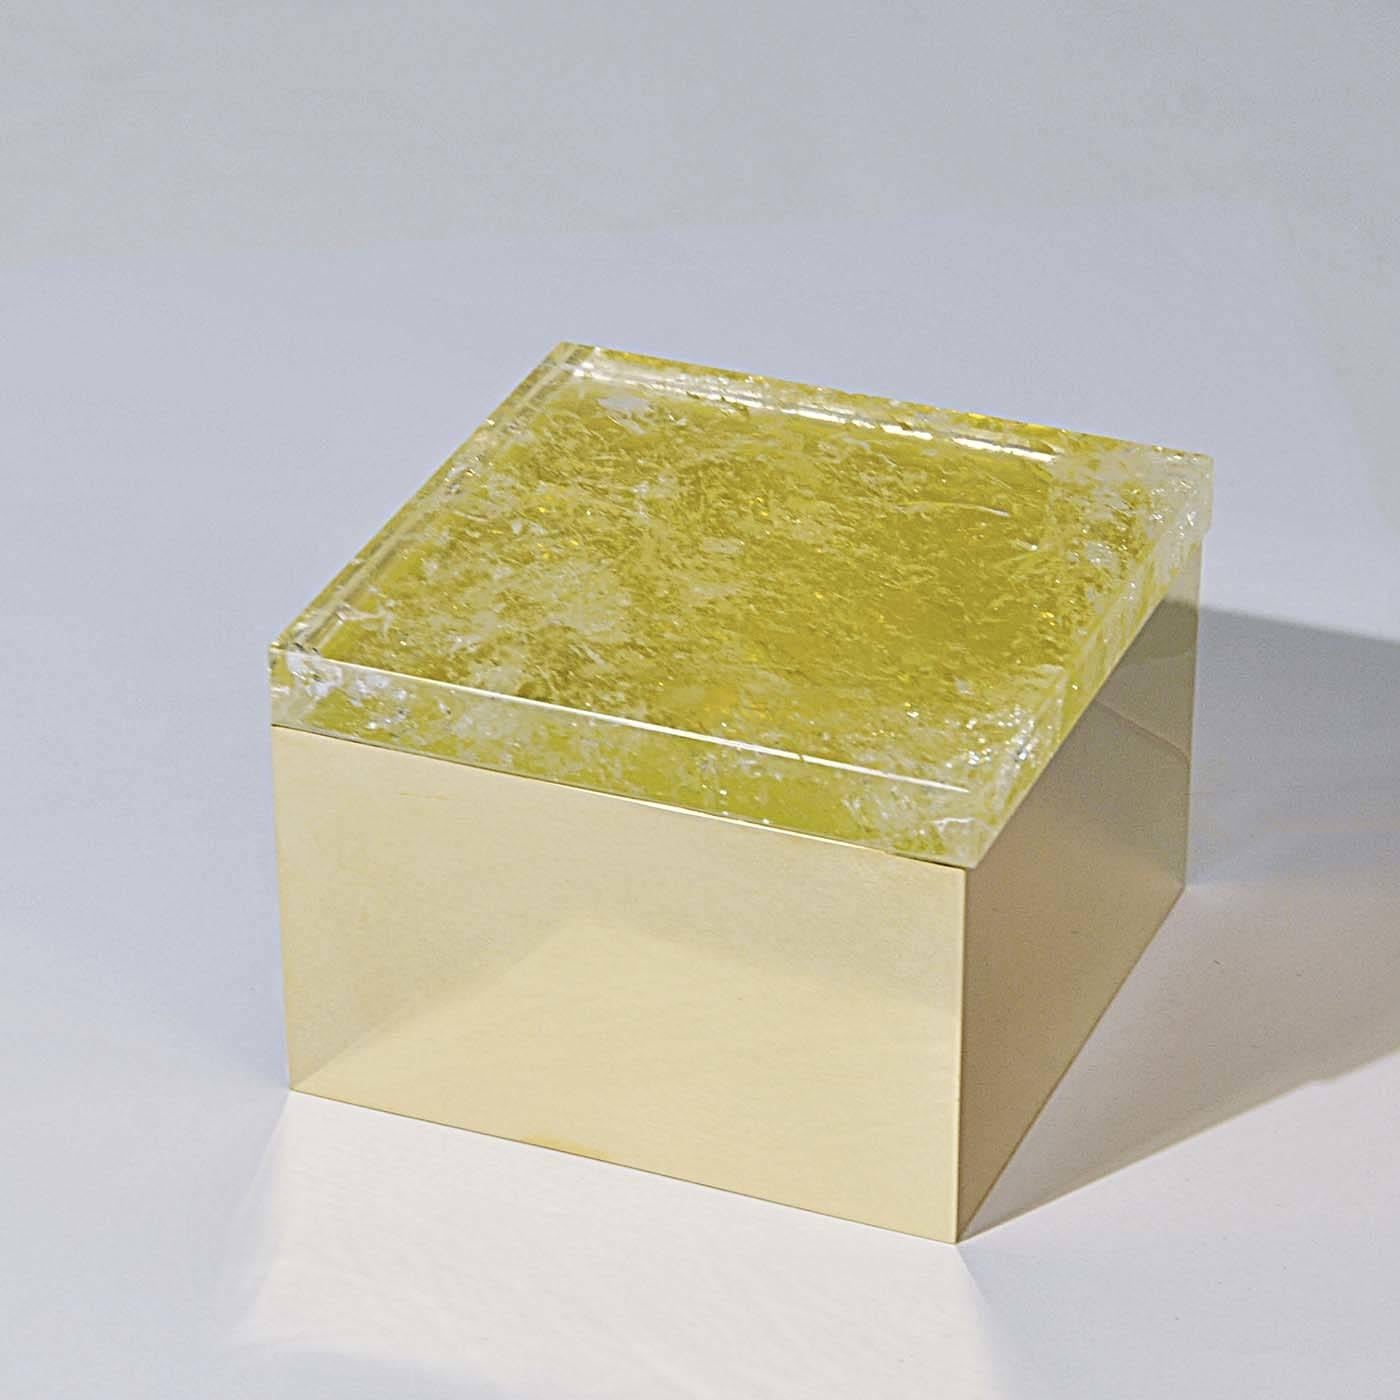 Bridging innovative craftsmanship with refined materials, this elegant box is a sculptural object of understated luxury. The square silhouette, made of polished gilt-plated brass, features a distinctive lid in vibrant yellow quartz. The rich yellow